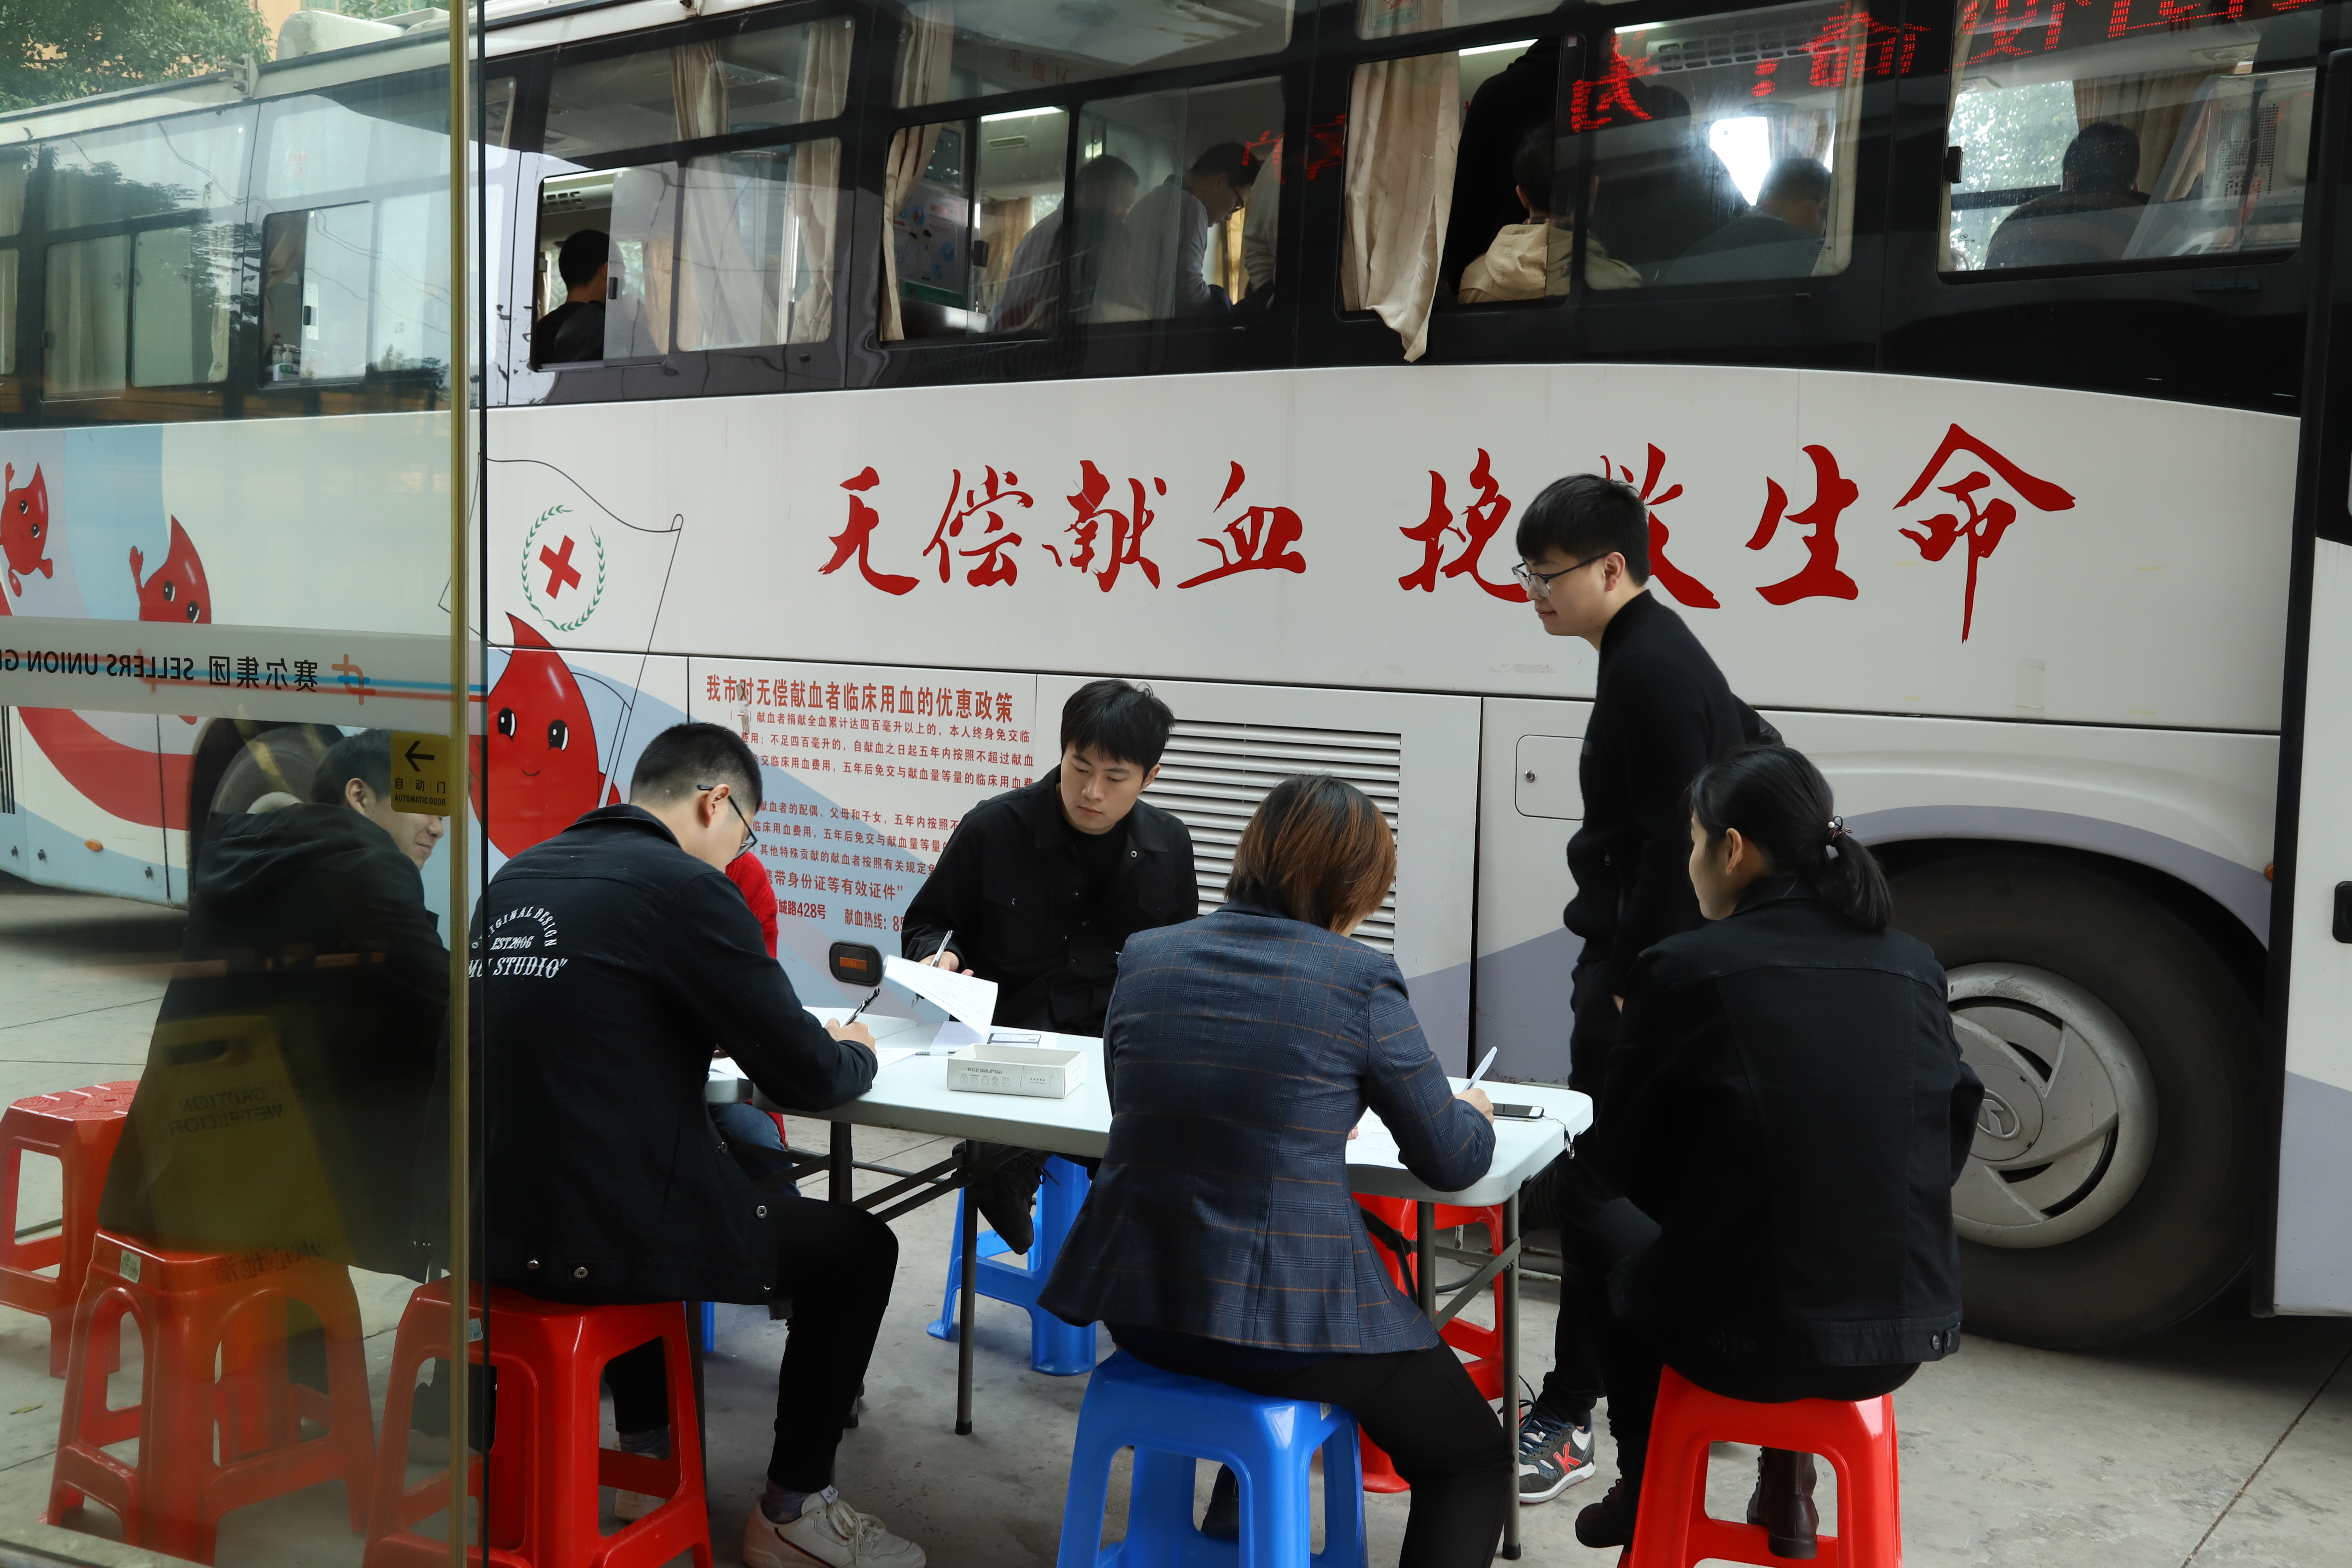 Sellers’ Employees Participated in the Voluntary Blood Donation Actively